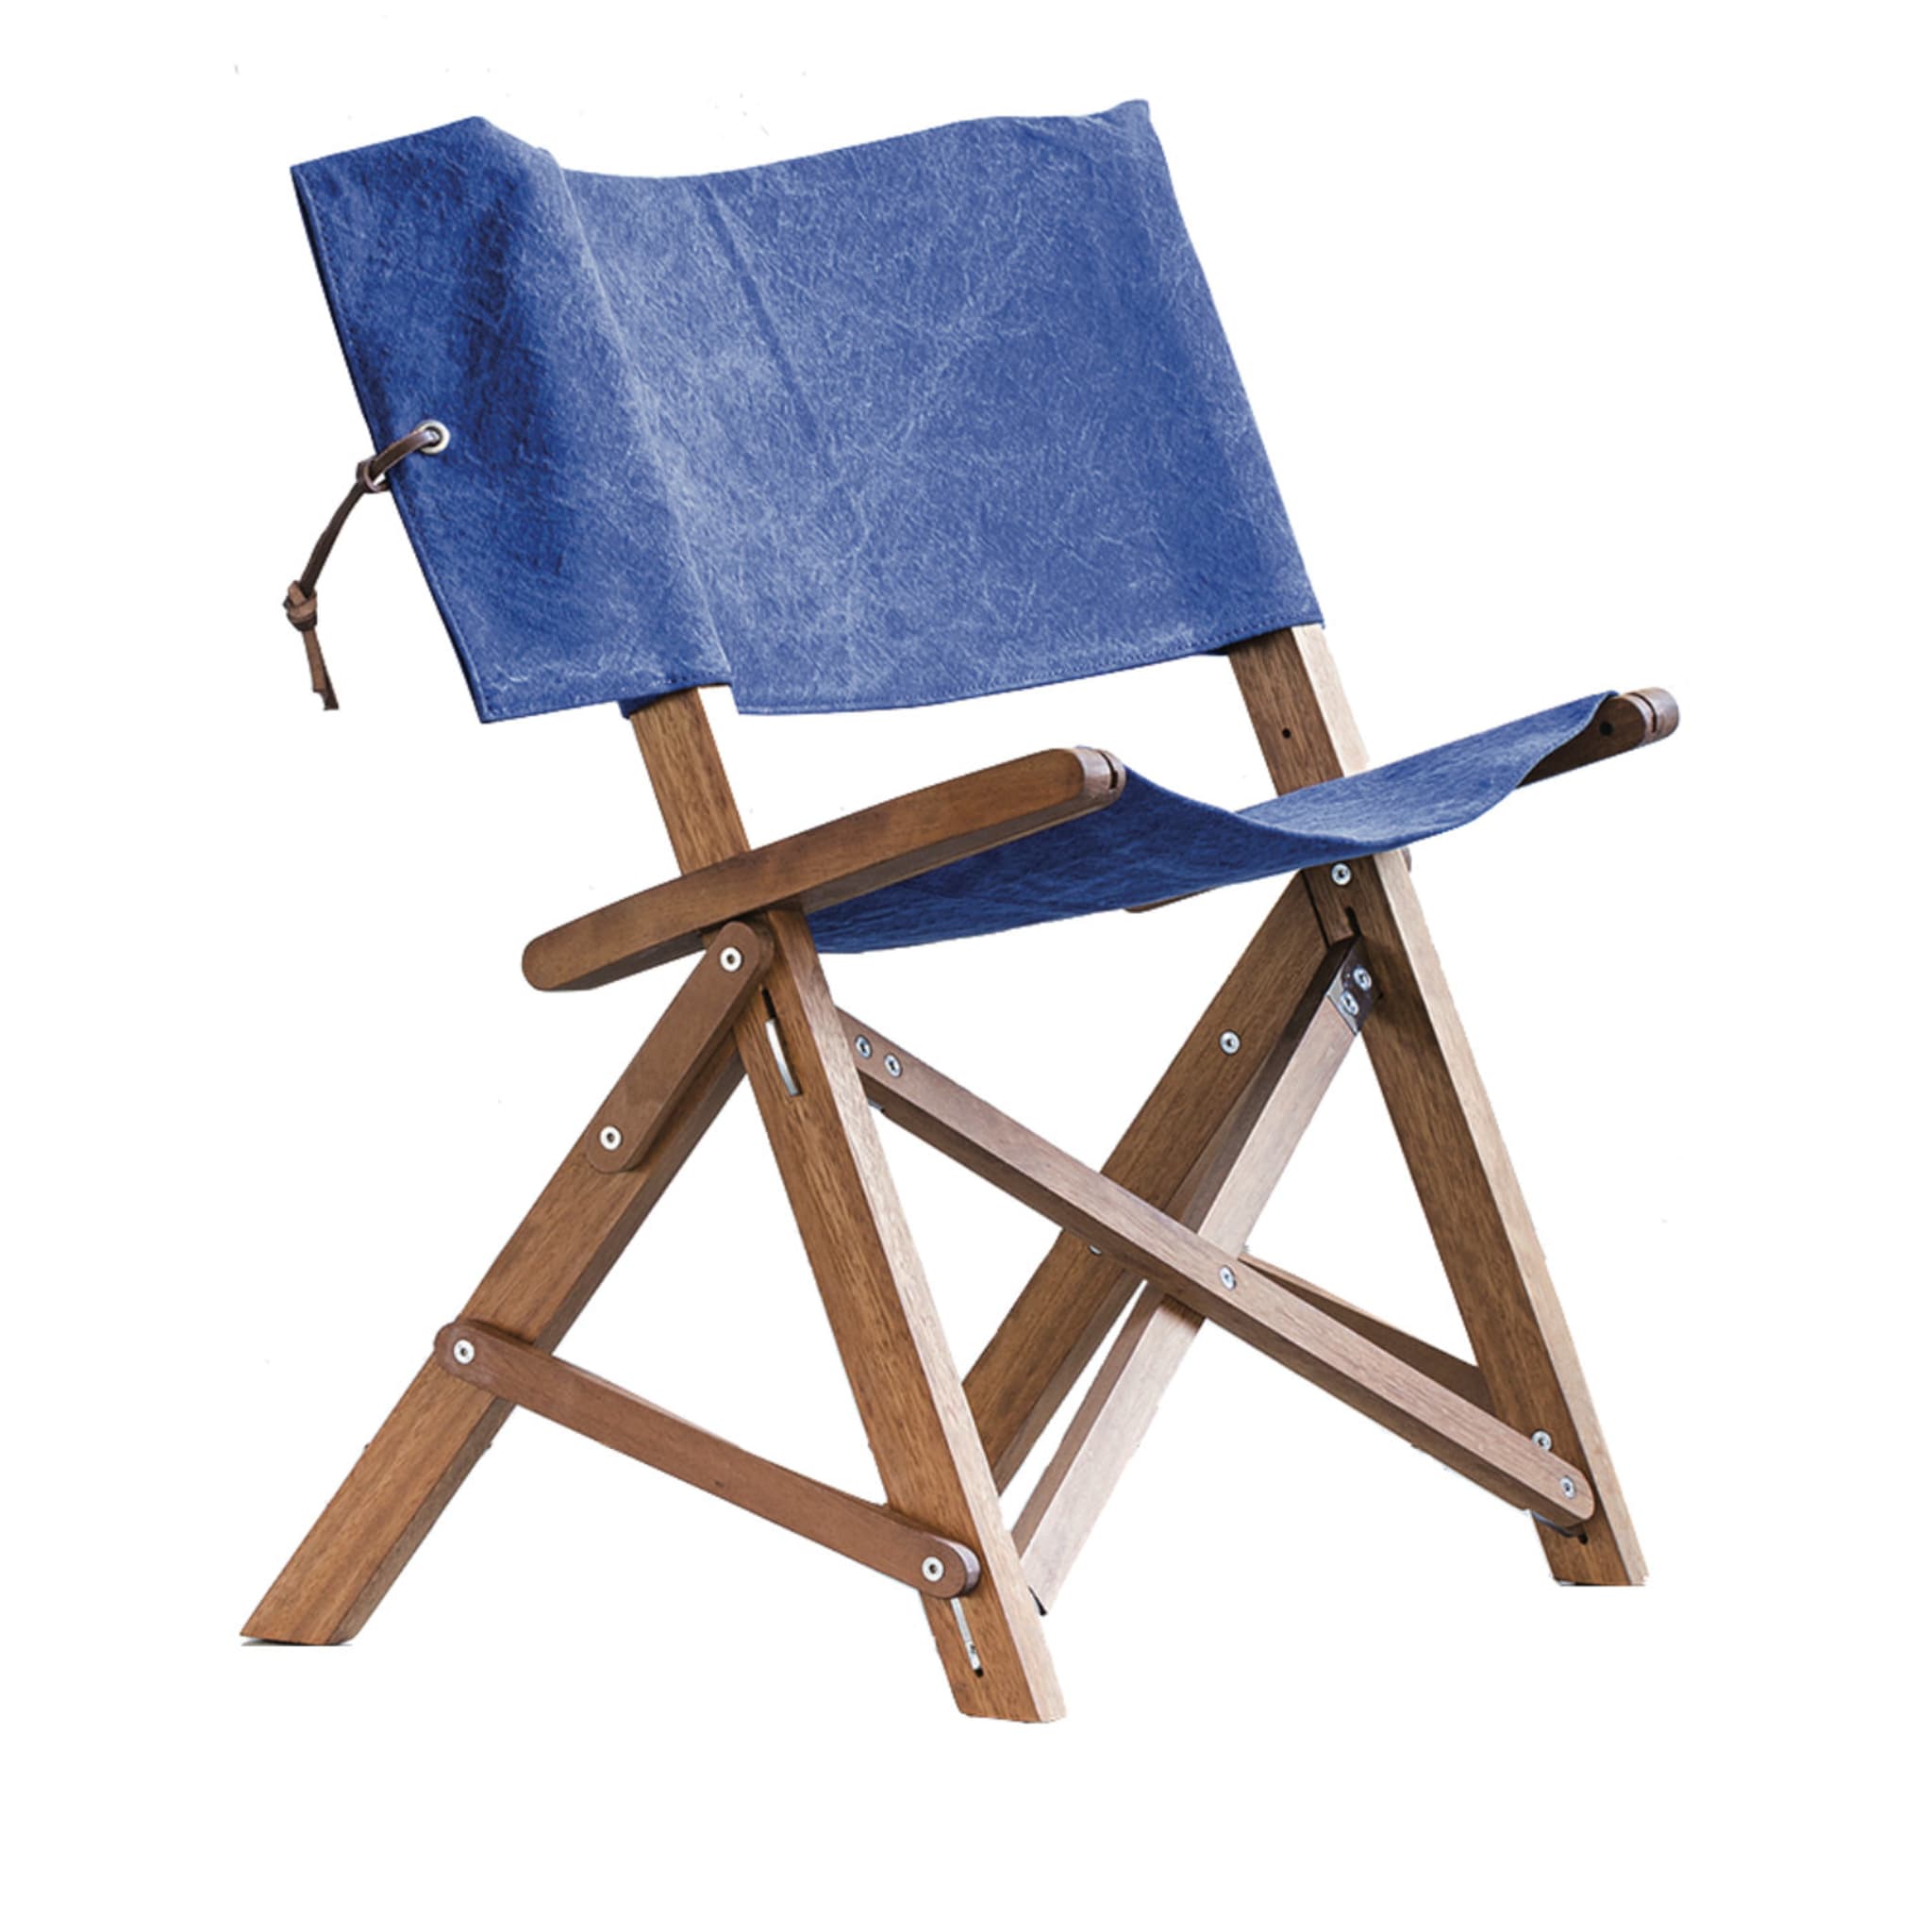 Dino Folding Chair by Tonuccidesign - Main view